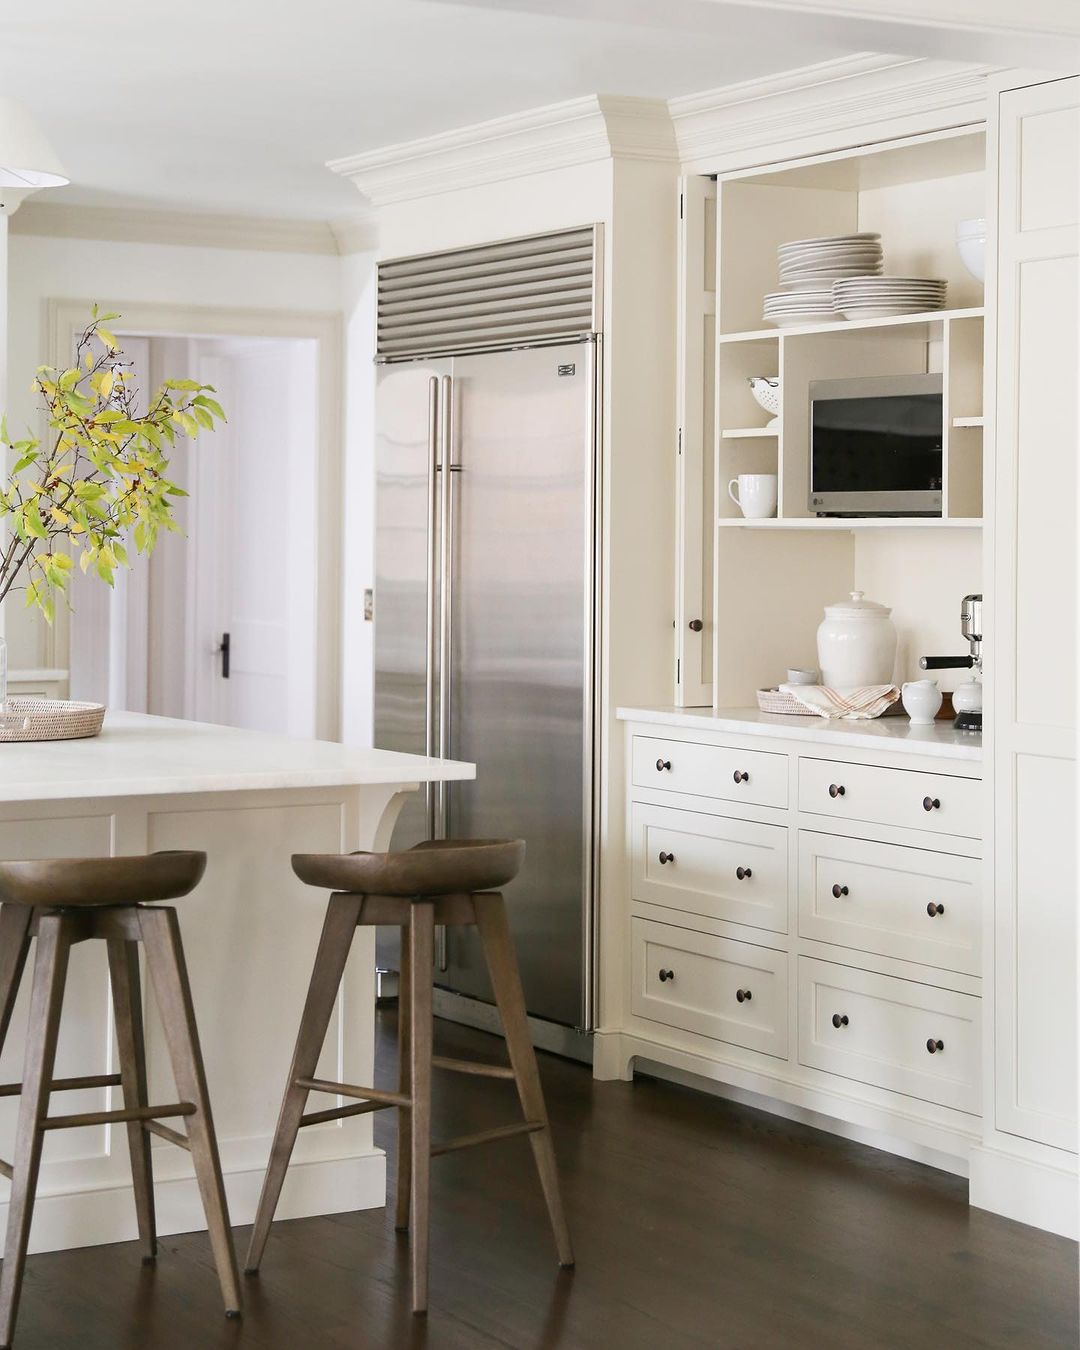 Sophisticated Contrast: Ivory Shaker Cabinets with Classic Knobs